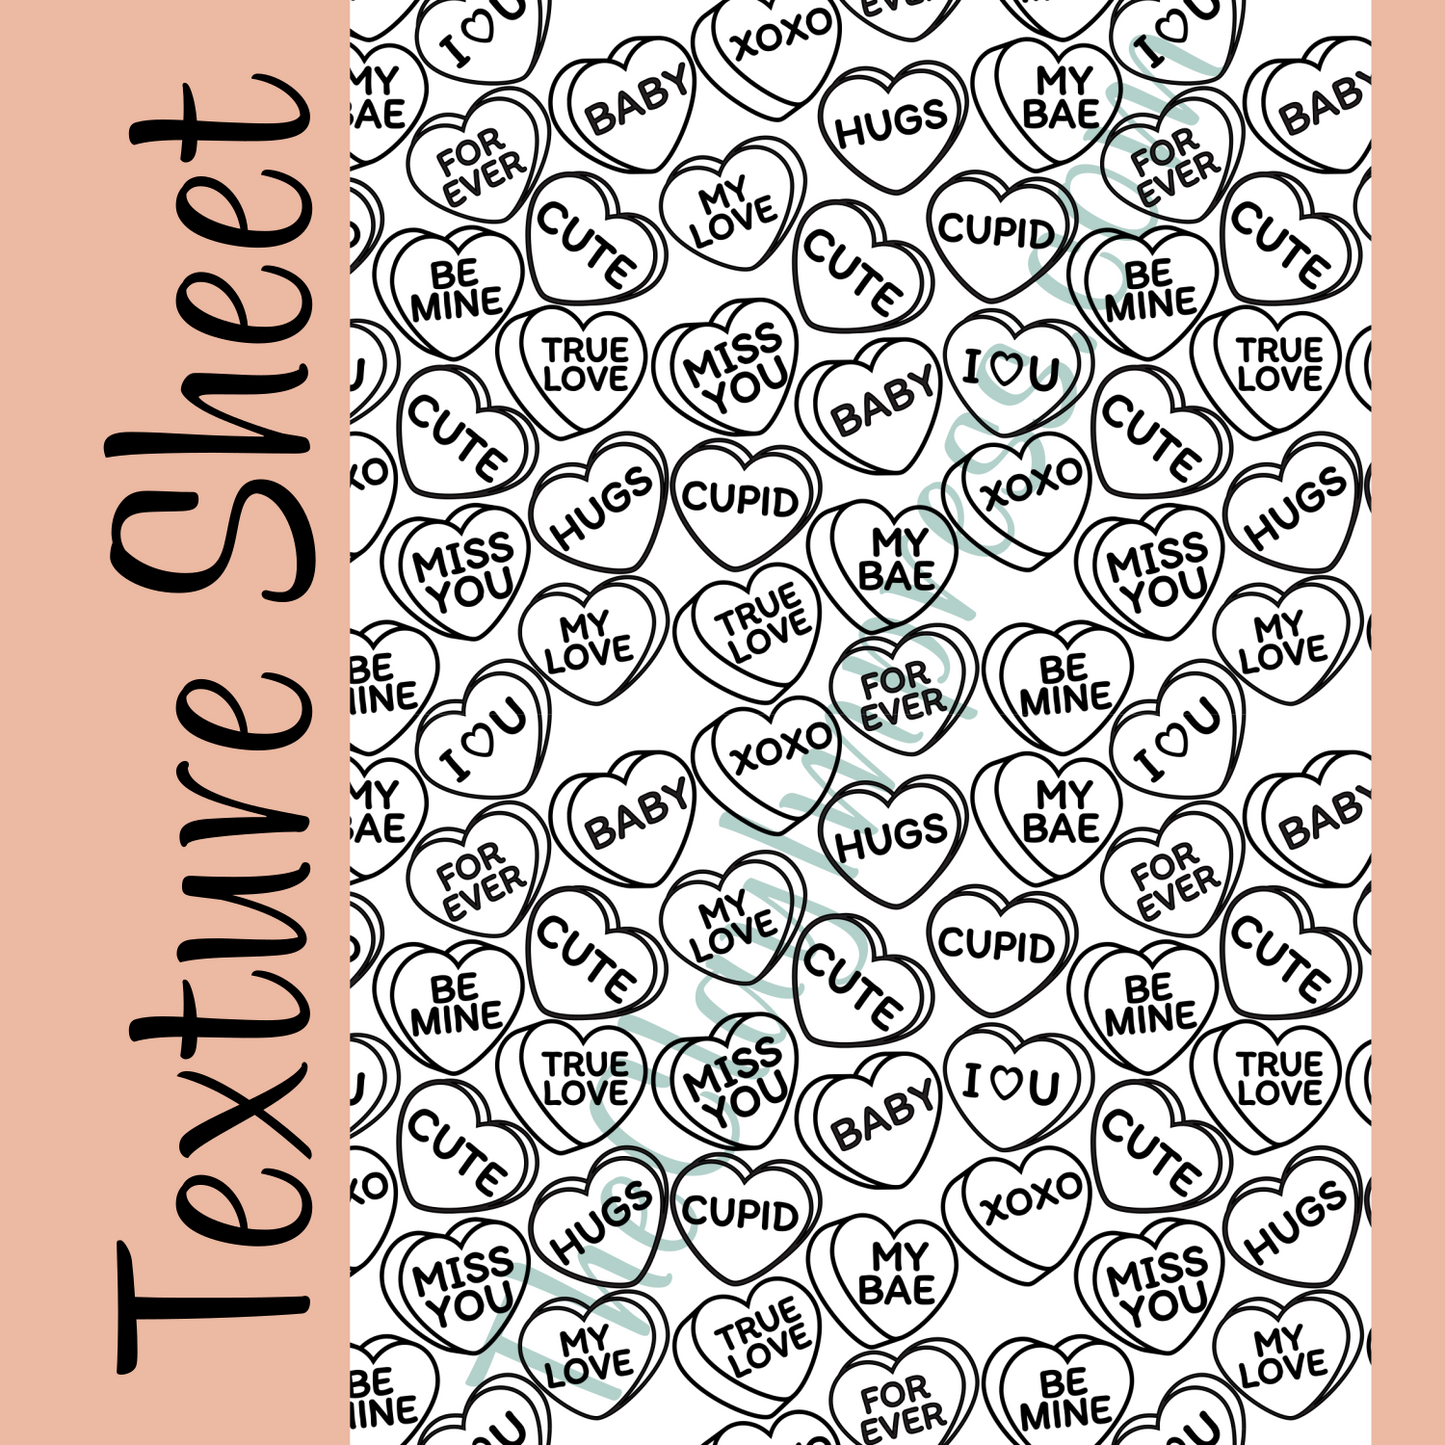 conversation hearts design with the words "I <3 U", "FOR EVER", "BE MINE", "CUTE" , "TRUE LOVE", "BABY", "MY LOVE", "HUGS", "CUPID", "MY BAE", "XOXO", "MISS YOU", "MY LOVE", "TRUE LOVE" pattern for texture sheet